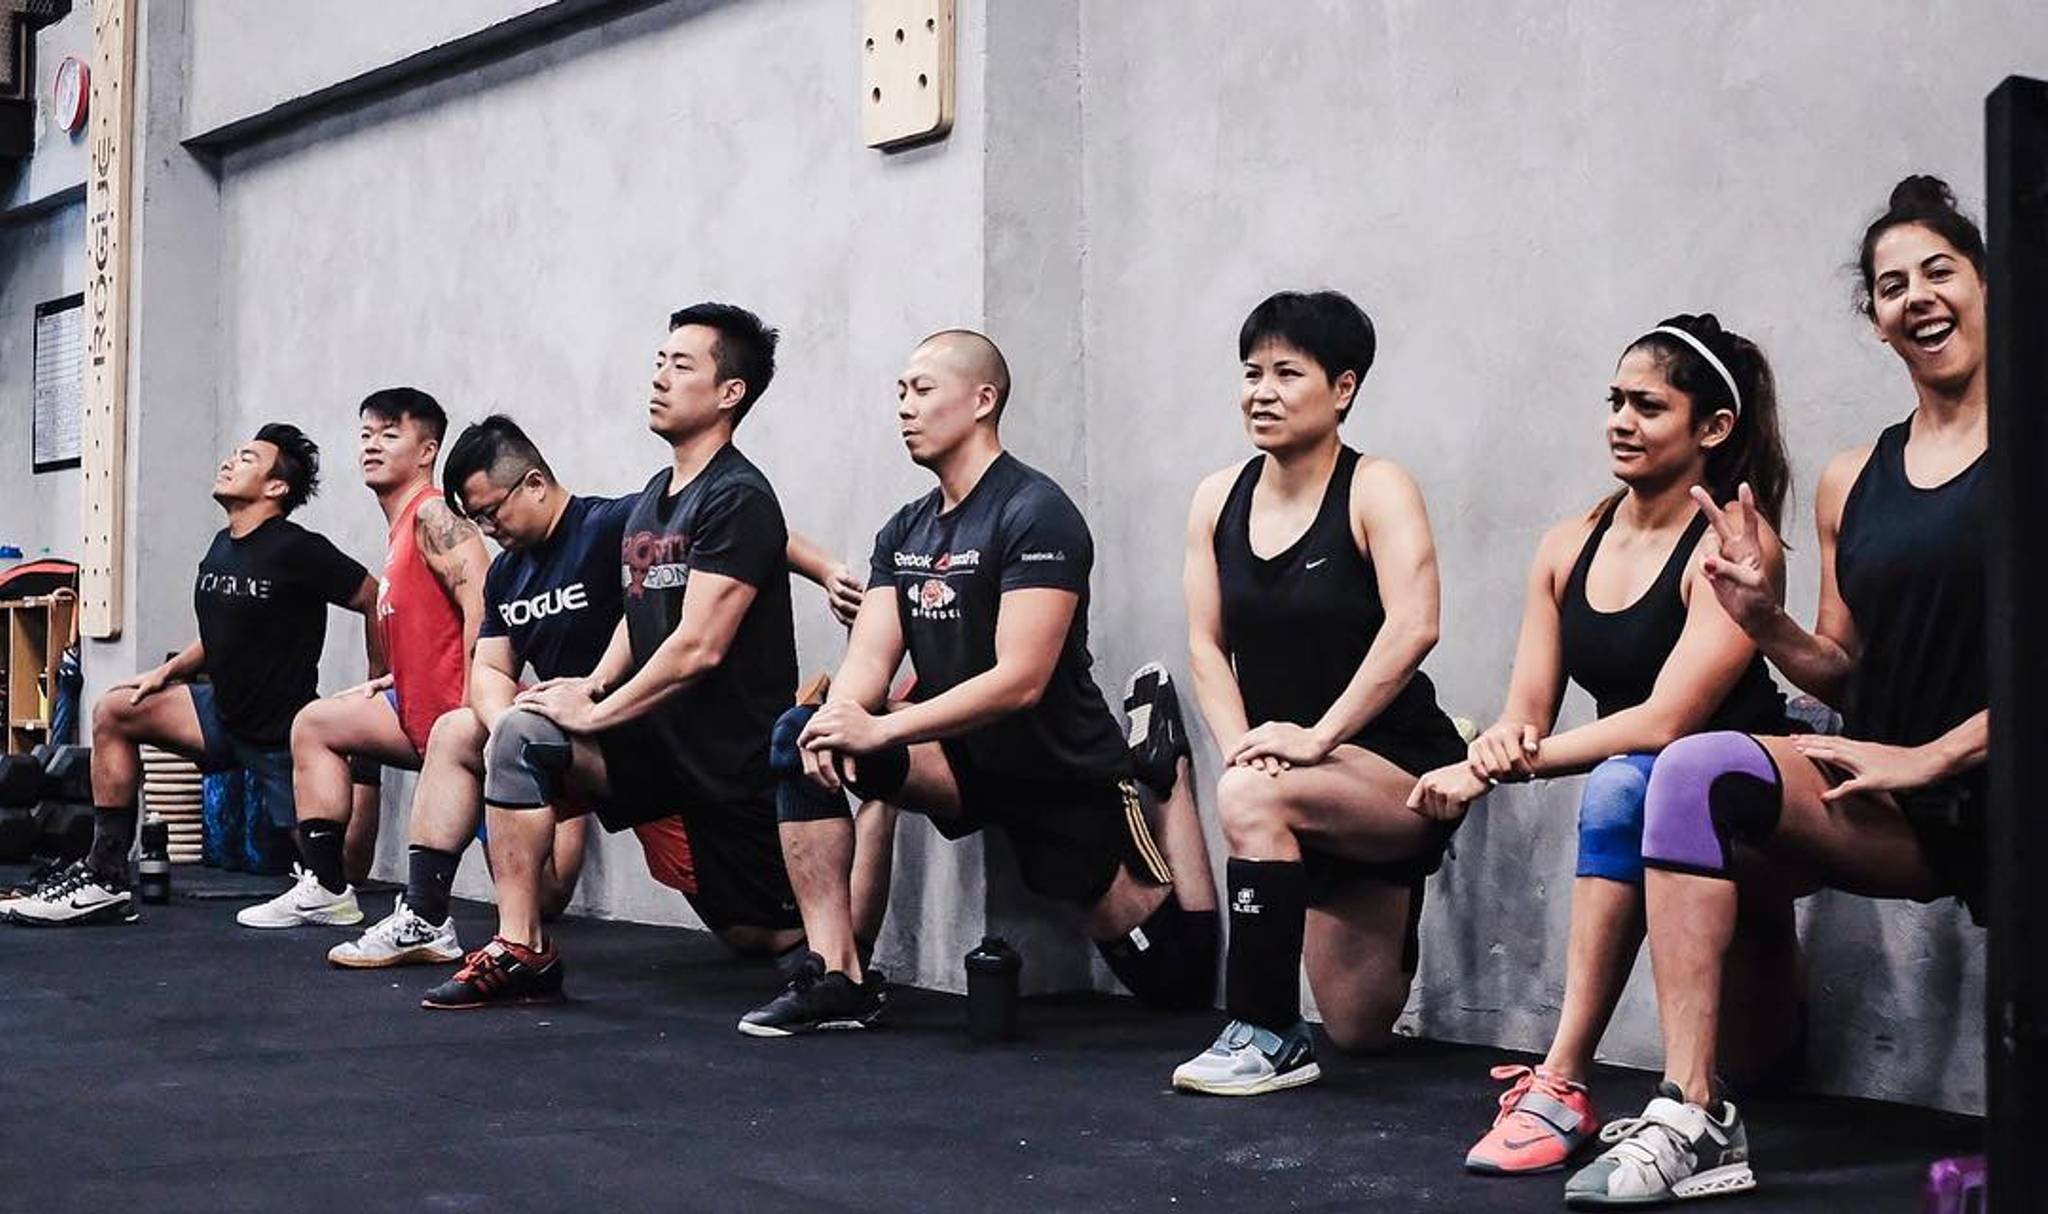 Hong Kongers are finding love in CrossFit groups